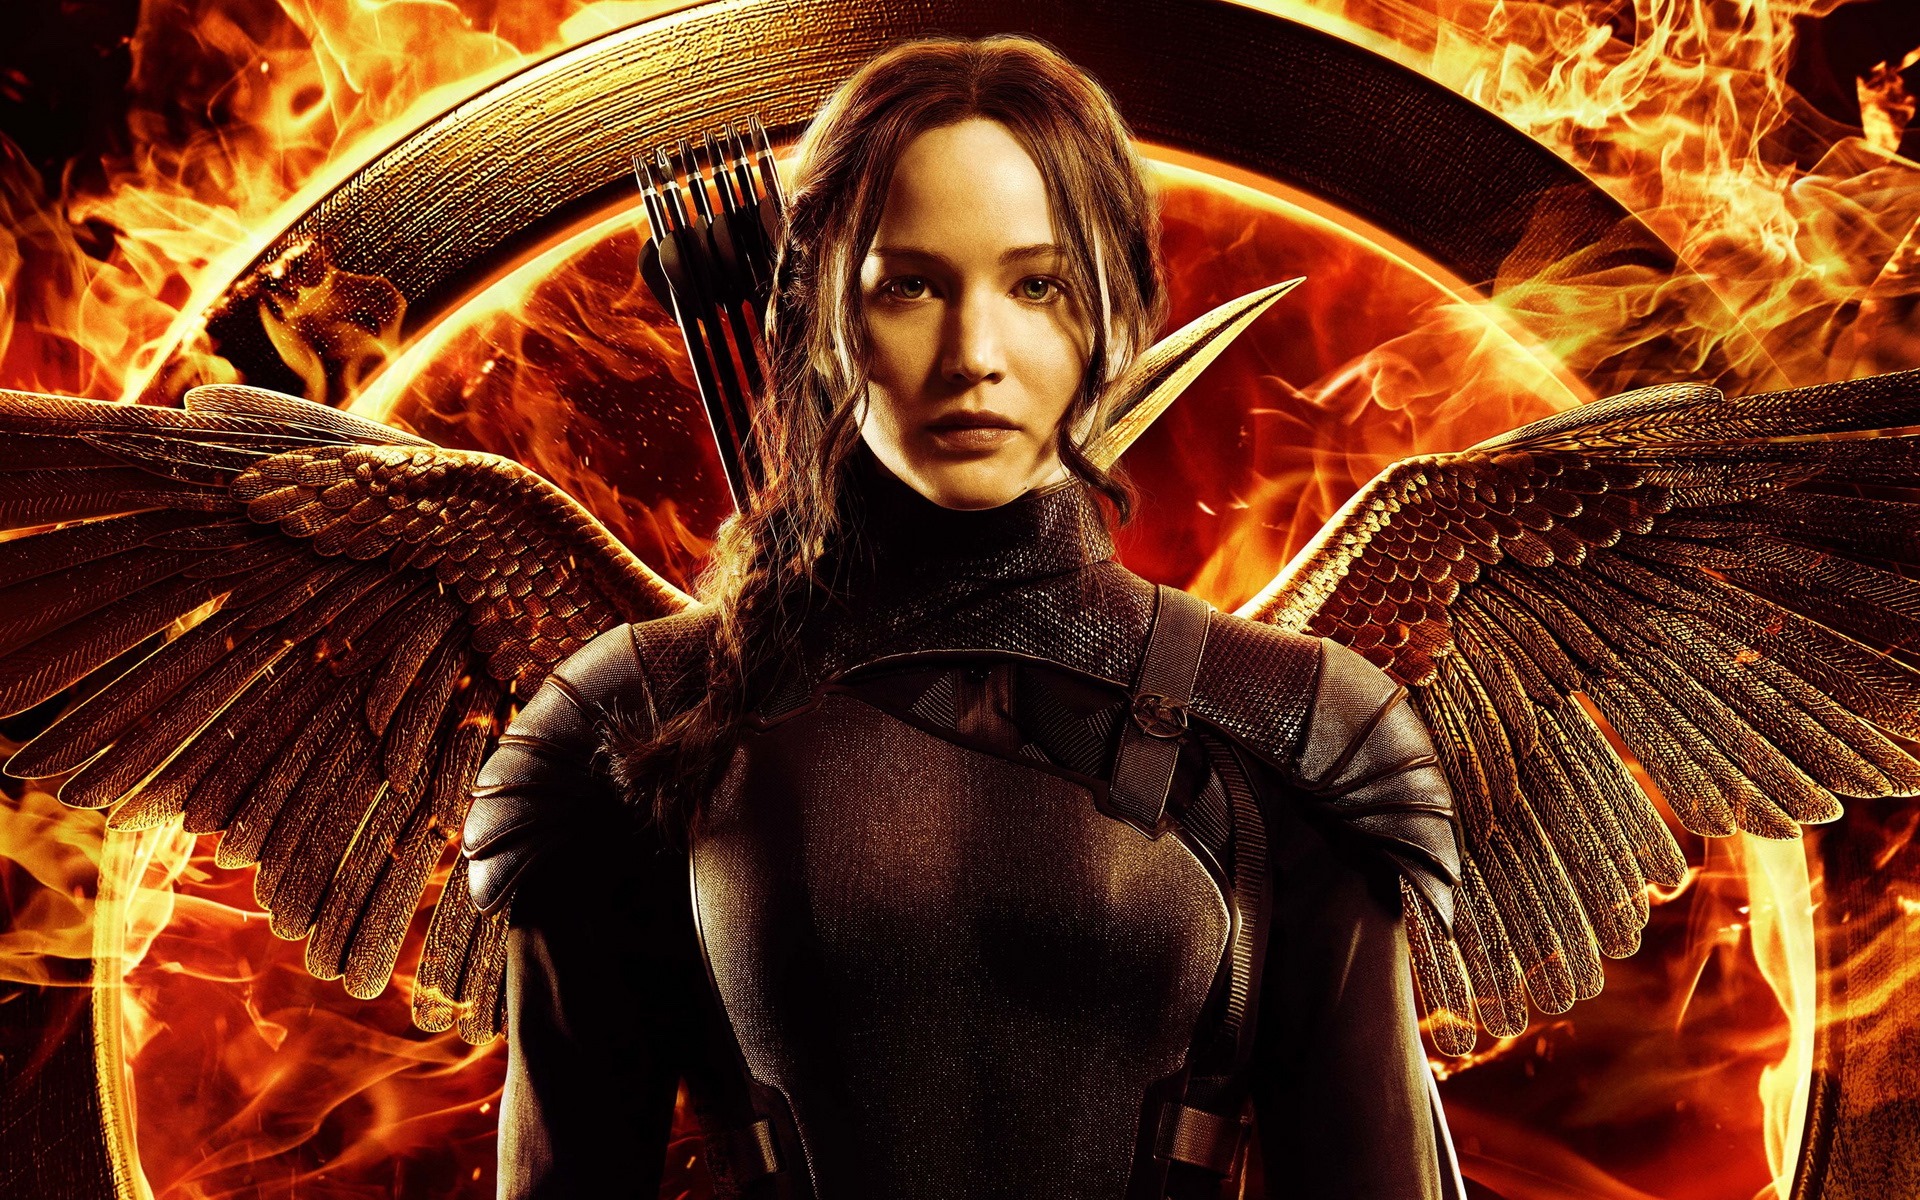 The Hunger Games: Mockingjay HD wallpapers #1 - 1920x1200